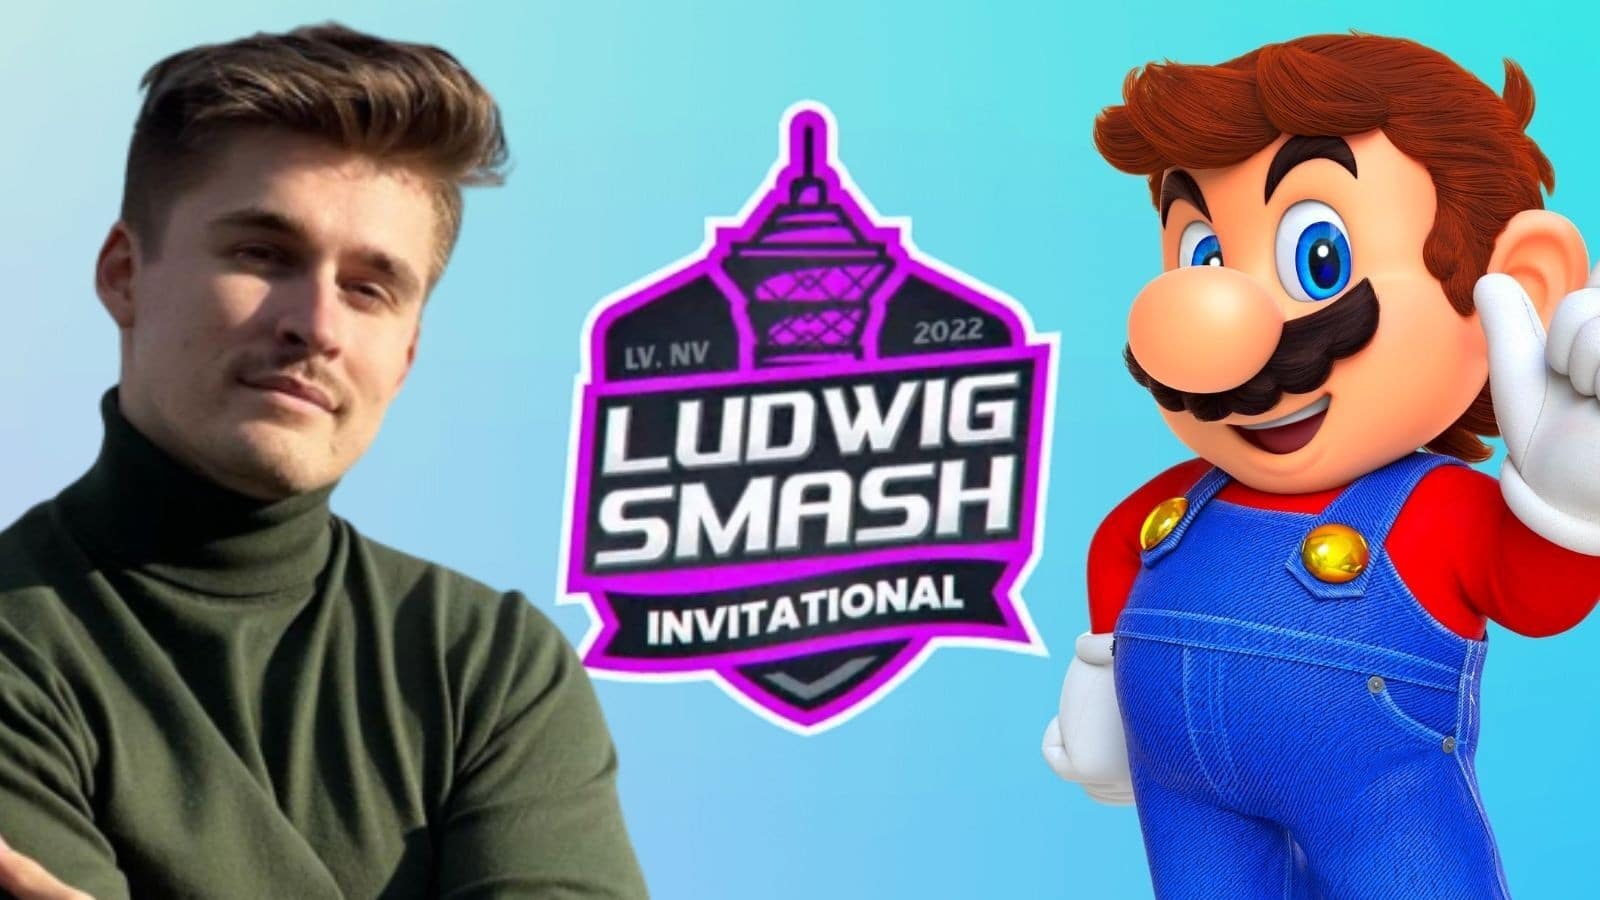 How to watch Ludwig’s 1m Smash invitational Dates, stream & details